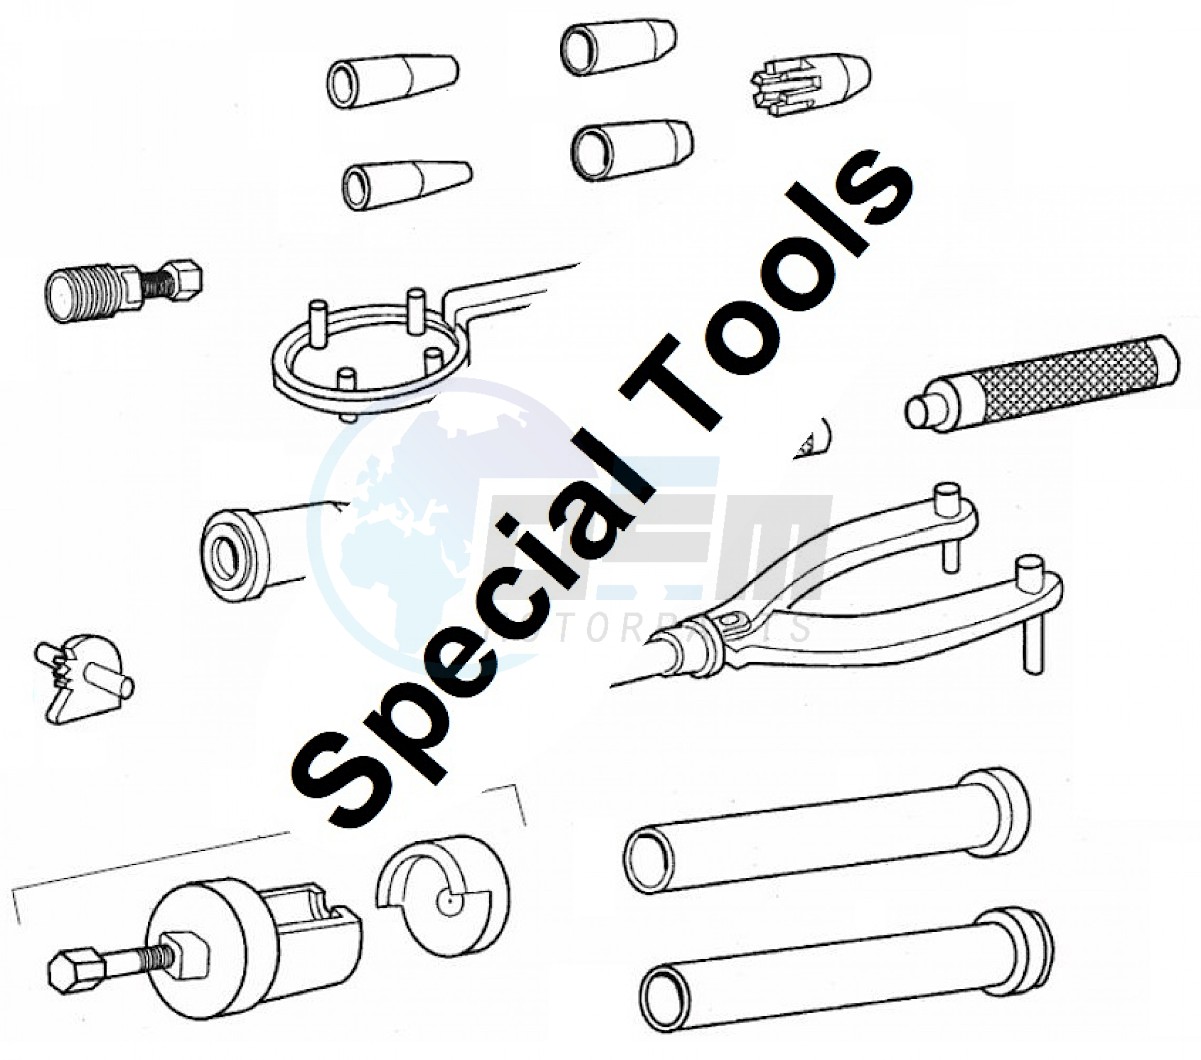 Tools (Positions) image